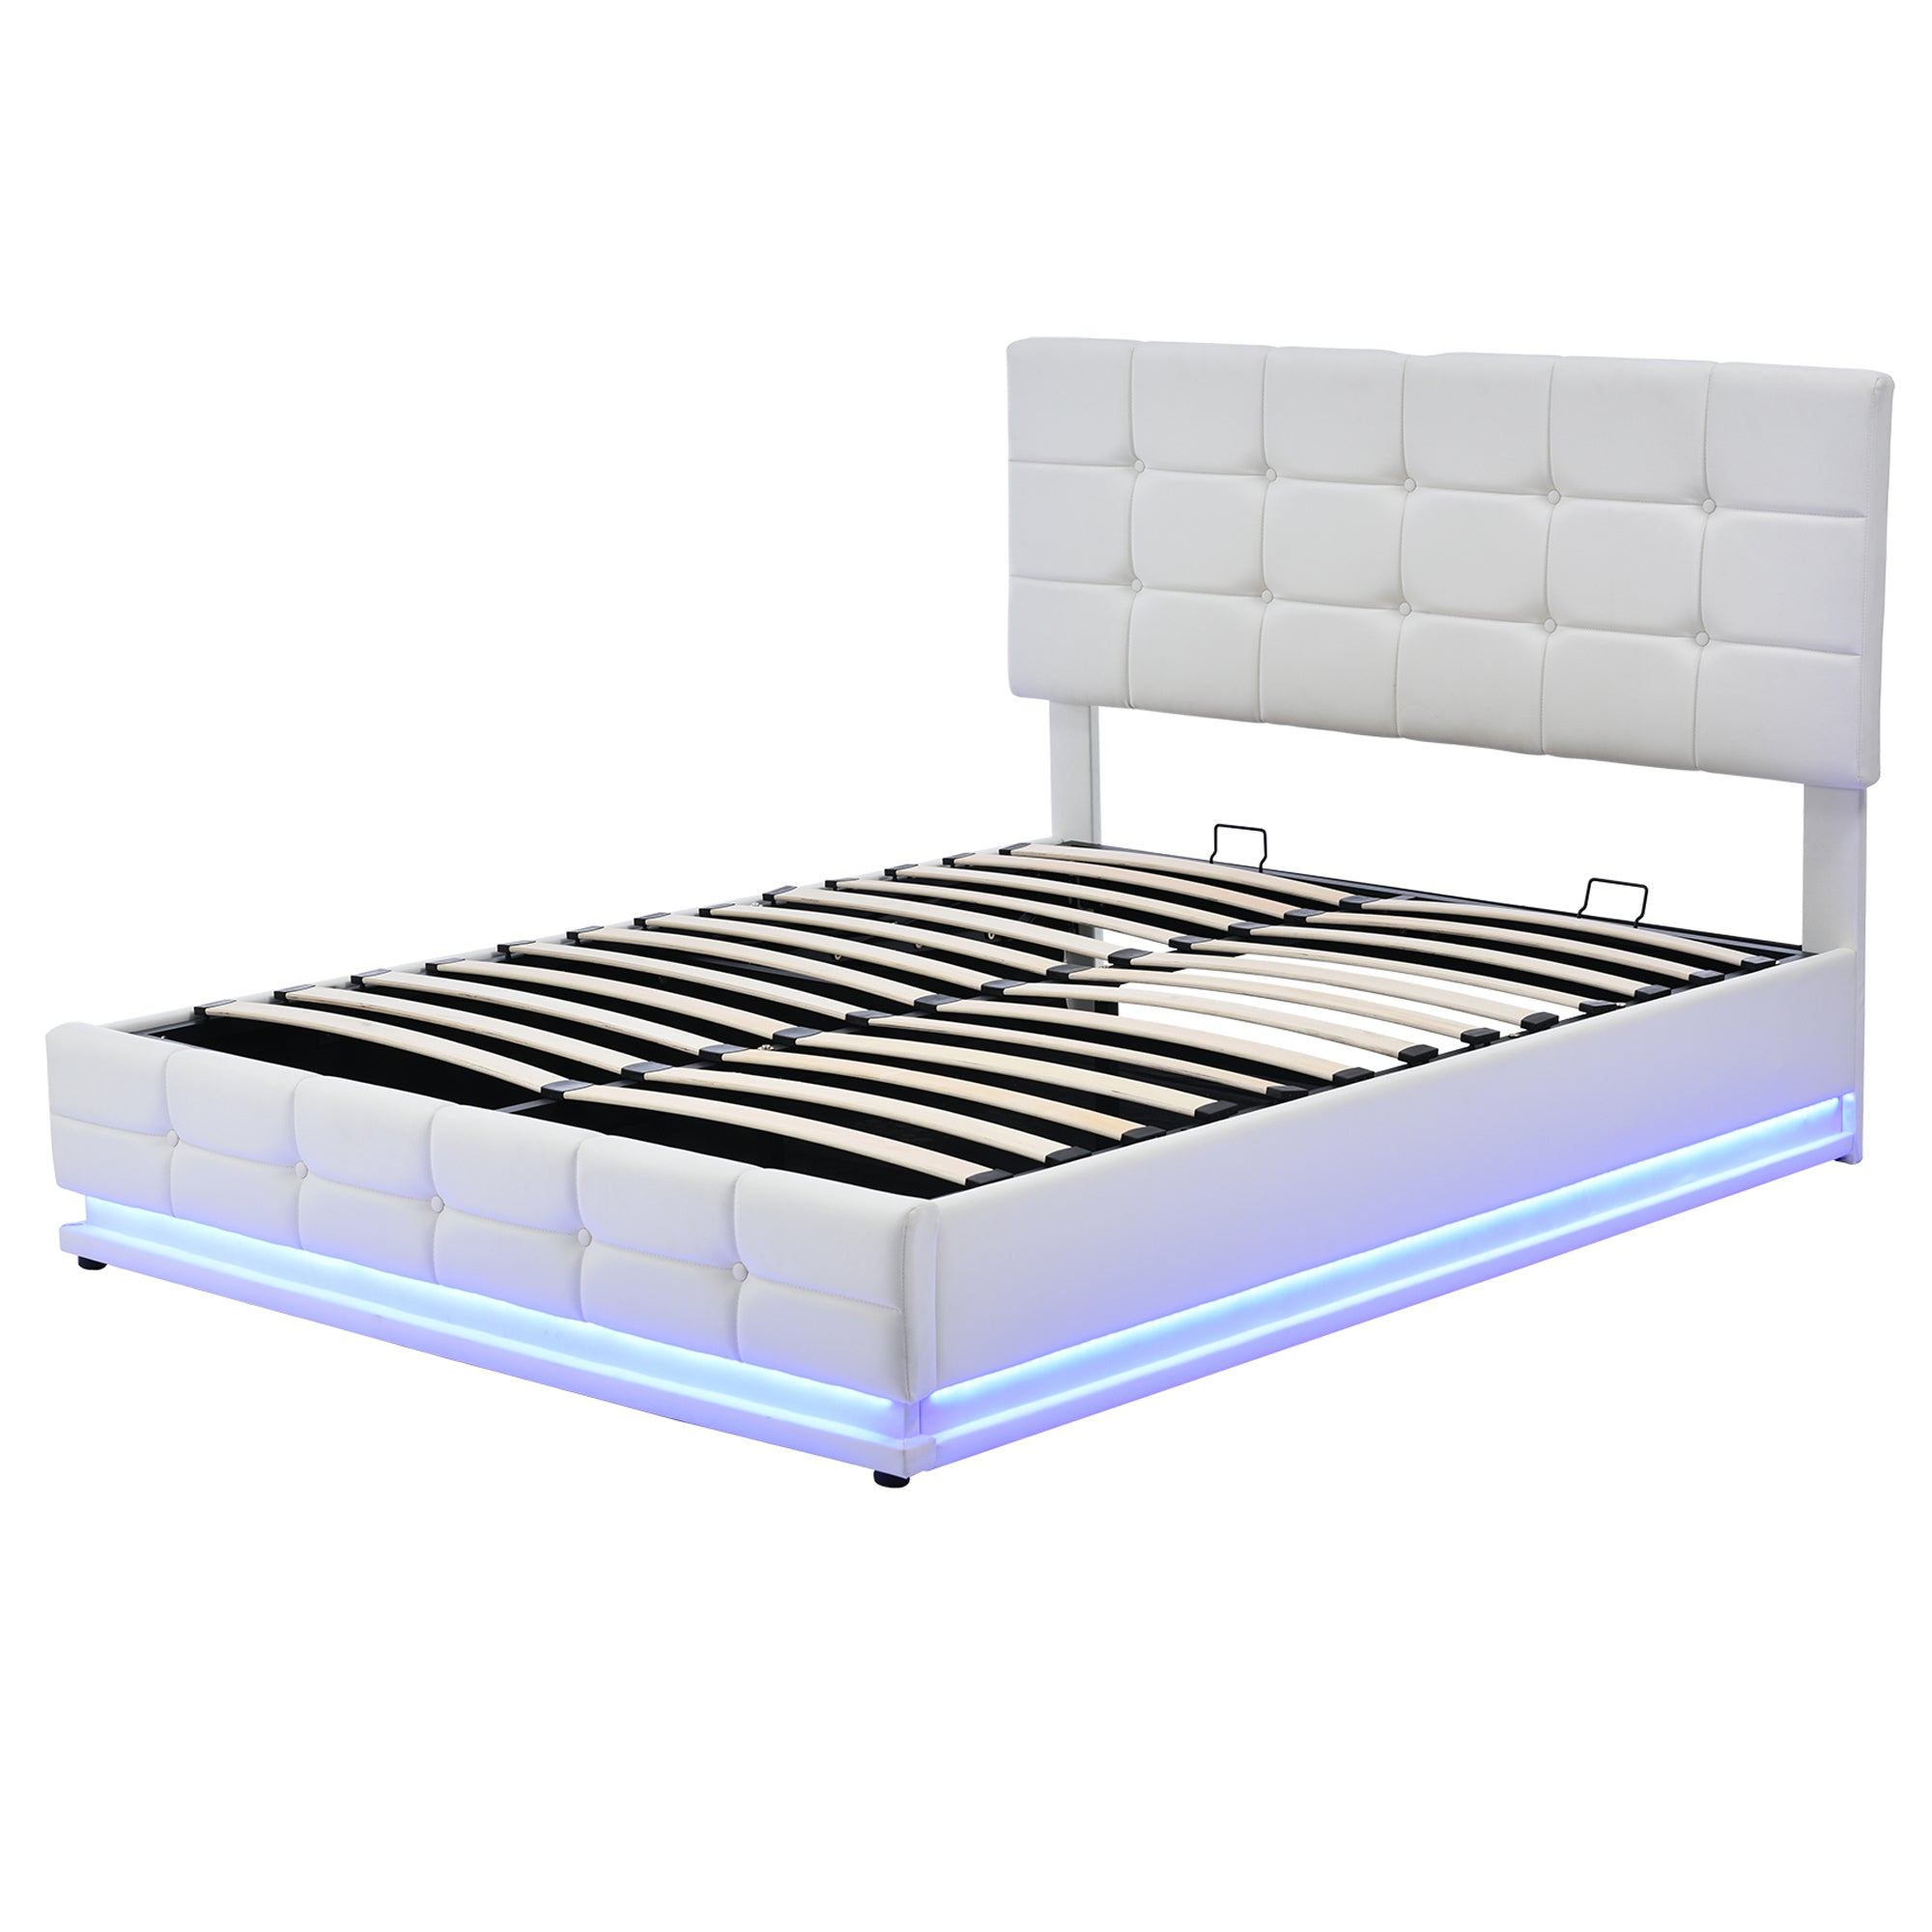 Kosmo White Queen Tufted Faux Leather Hydraulic Lift Platform Storage Bed With LED Light, USB Charger